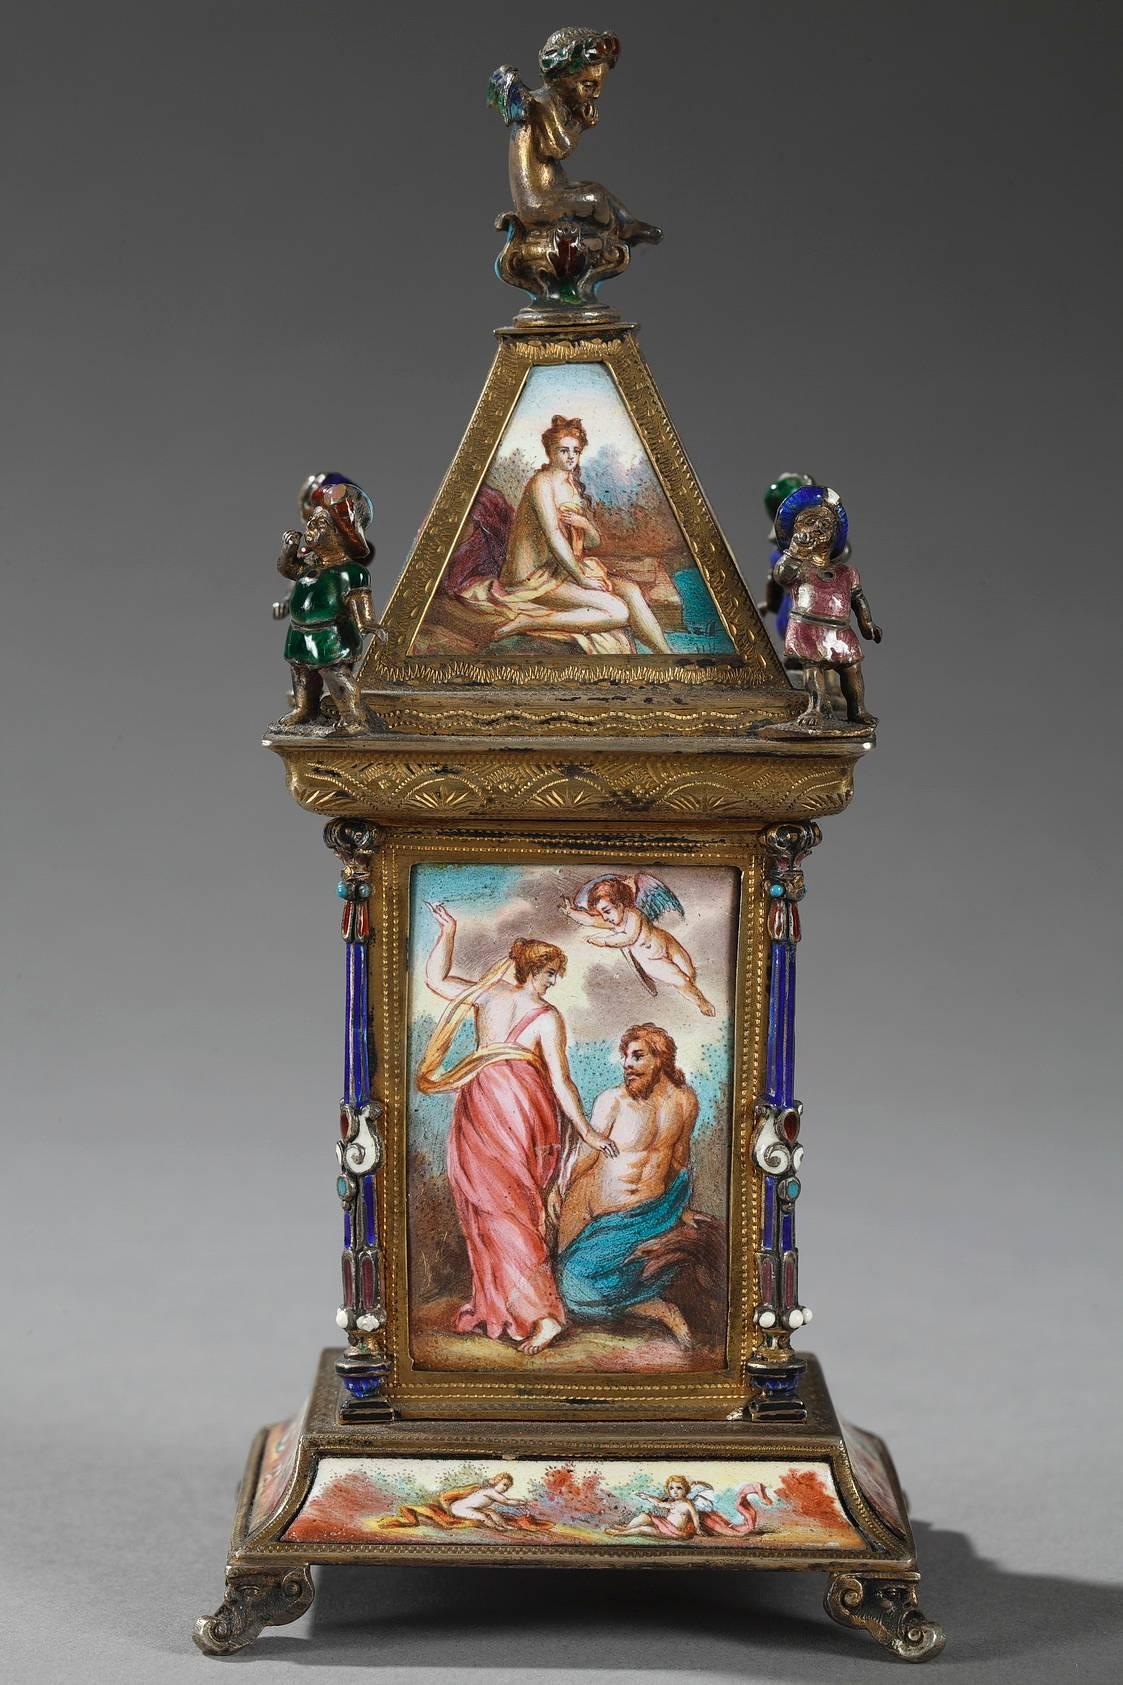 Viennese enamel and silver clock, 19th century.

Small silver and multicolored enamel clock. It is richly decorated with mythological scenes, people in flowing garments and Cupids in landscapes. The circular clock face marks the hours in Roman